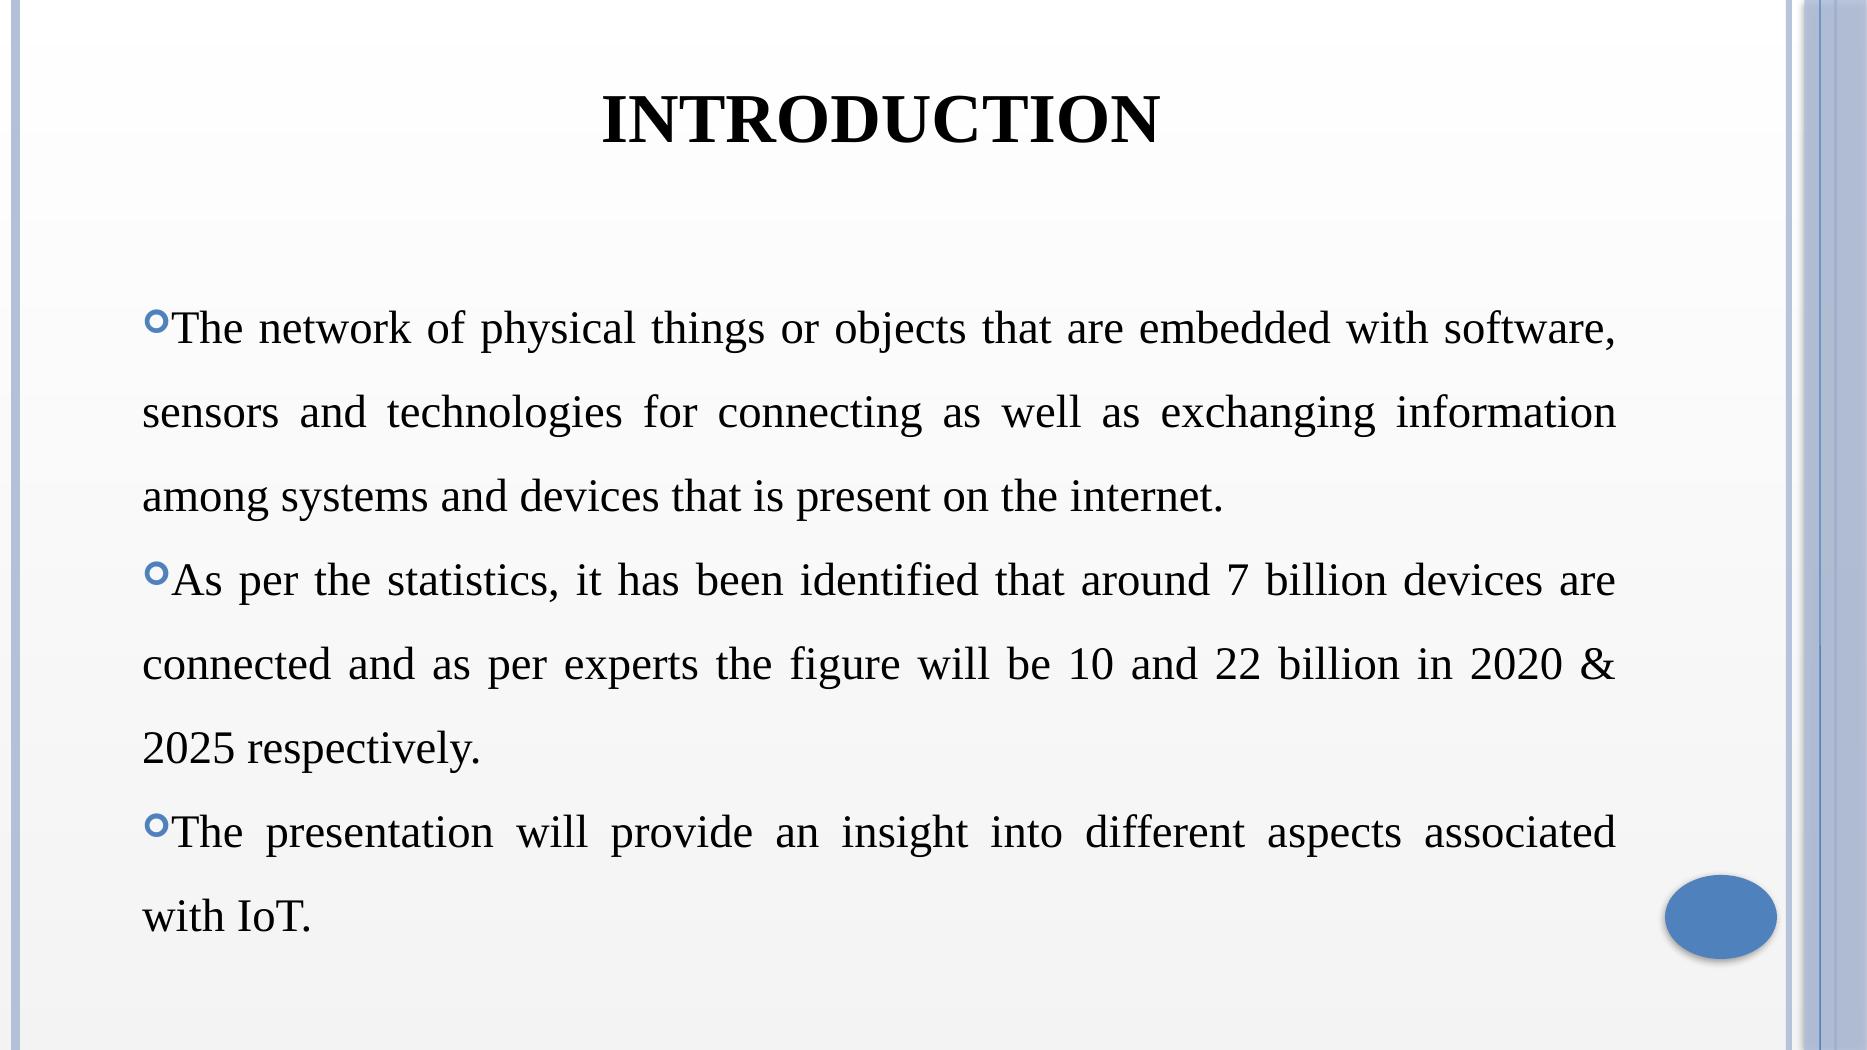 Technical Document for Internet of Things_2